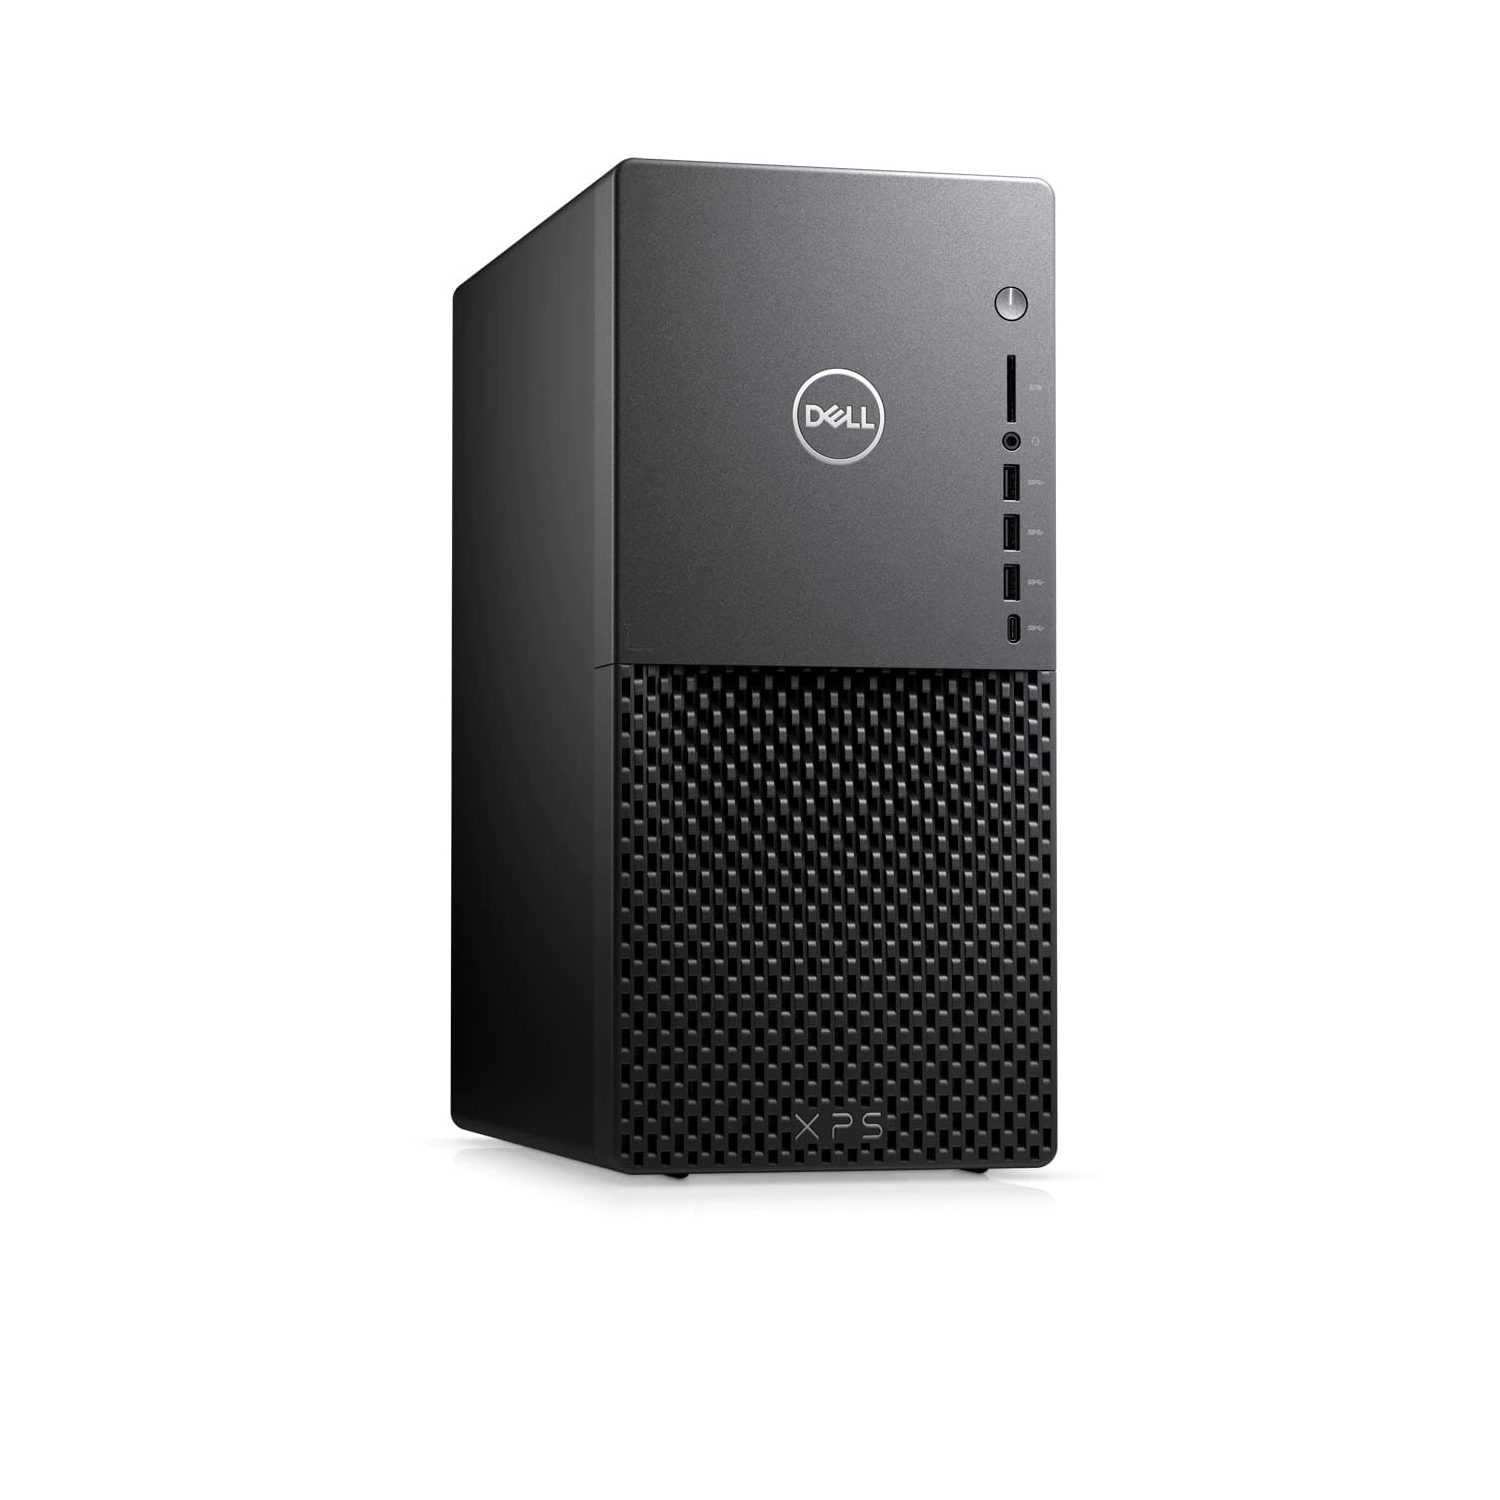 Refurbished (Excellent) - Dell XPS 8940 Desktop (2020) | Core i7 - 1TB HDD + 512GB SSD - 32GB RAM | 8 Cores @ 4.8 GHz - 10th Gen CPU Certified Refurbished